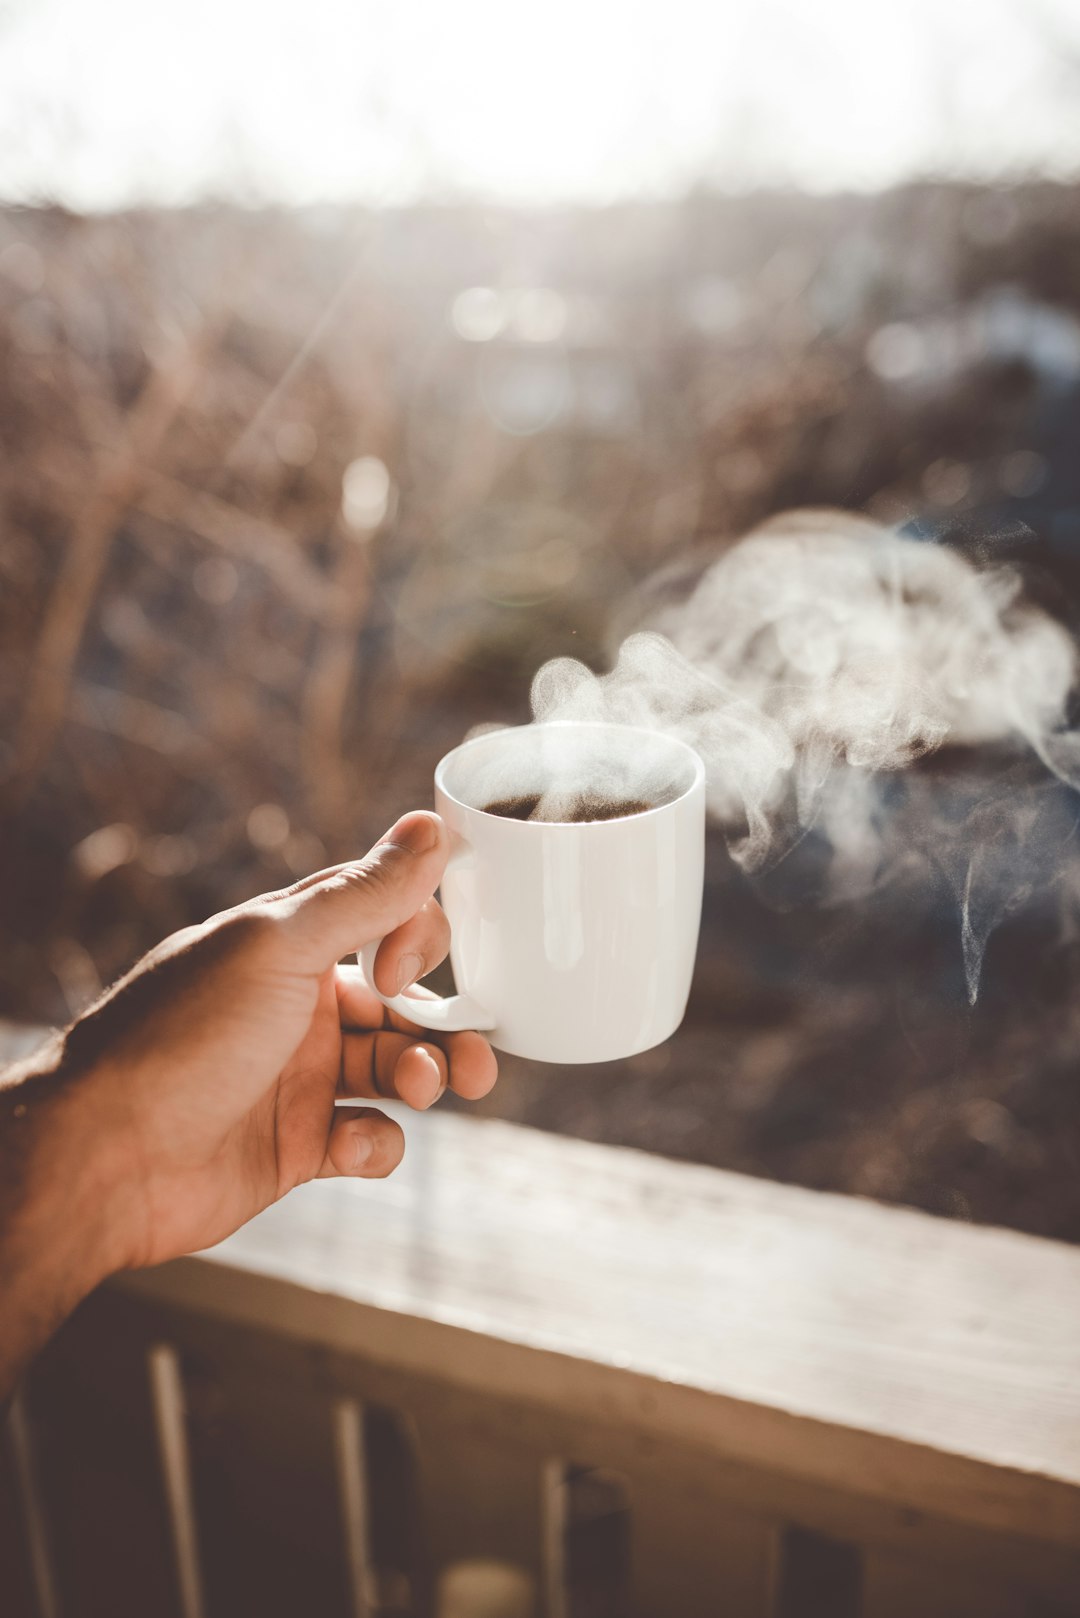 A few practical thoughts on quitting caffeine